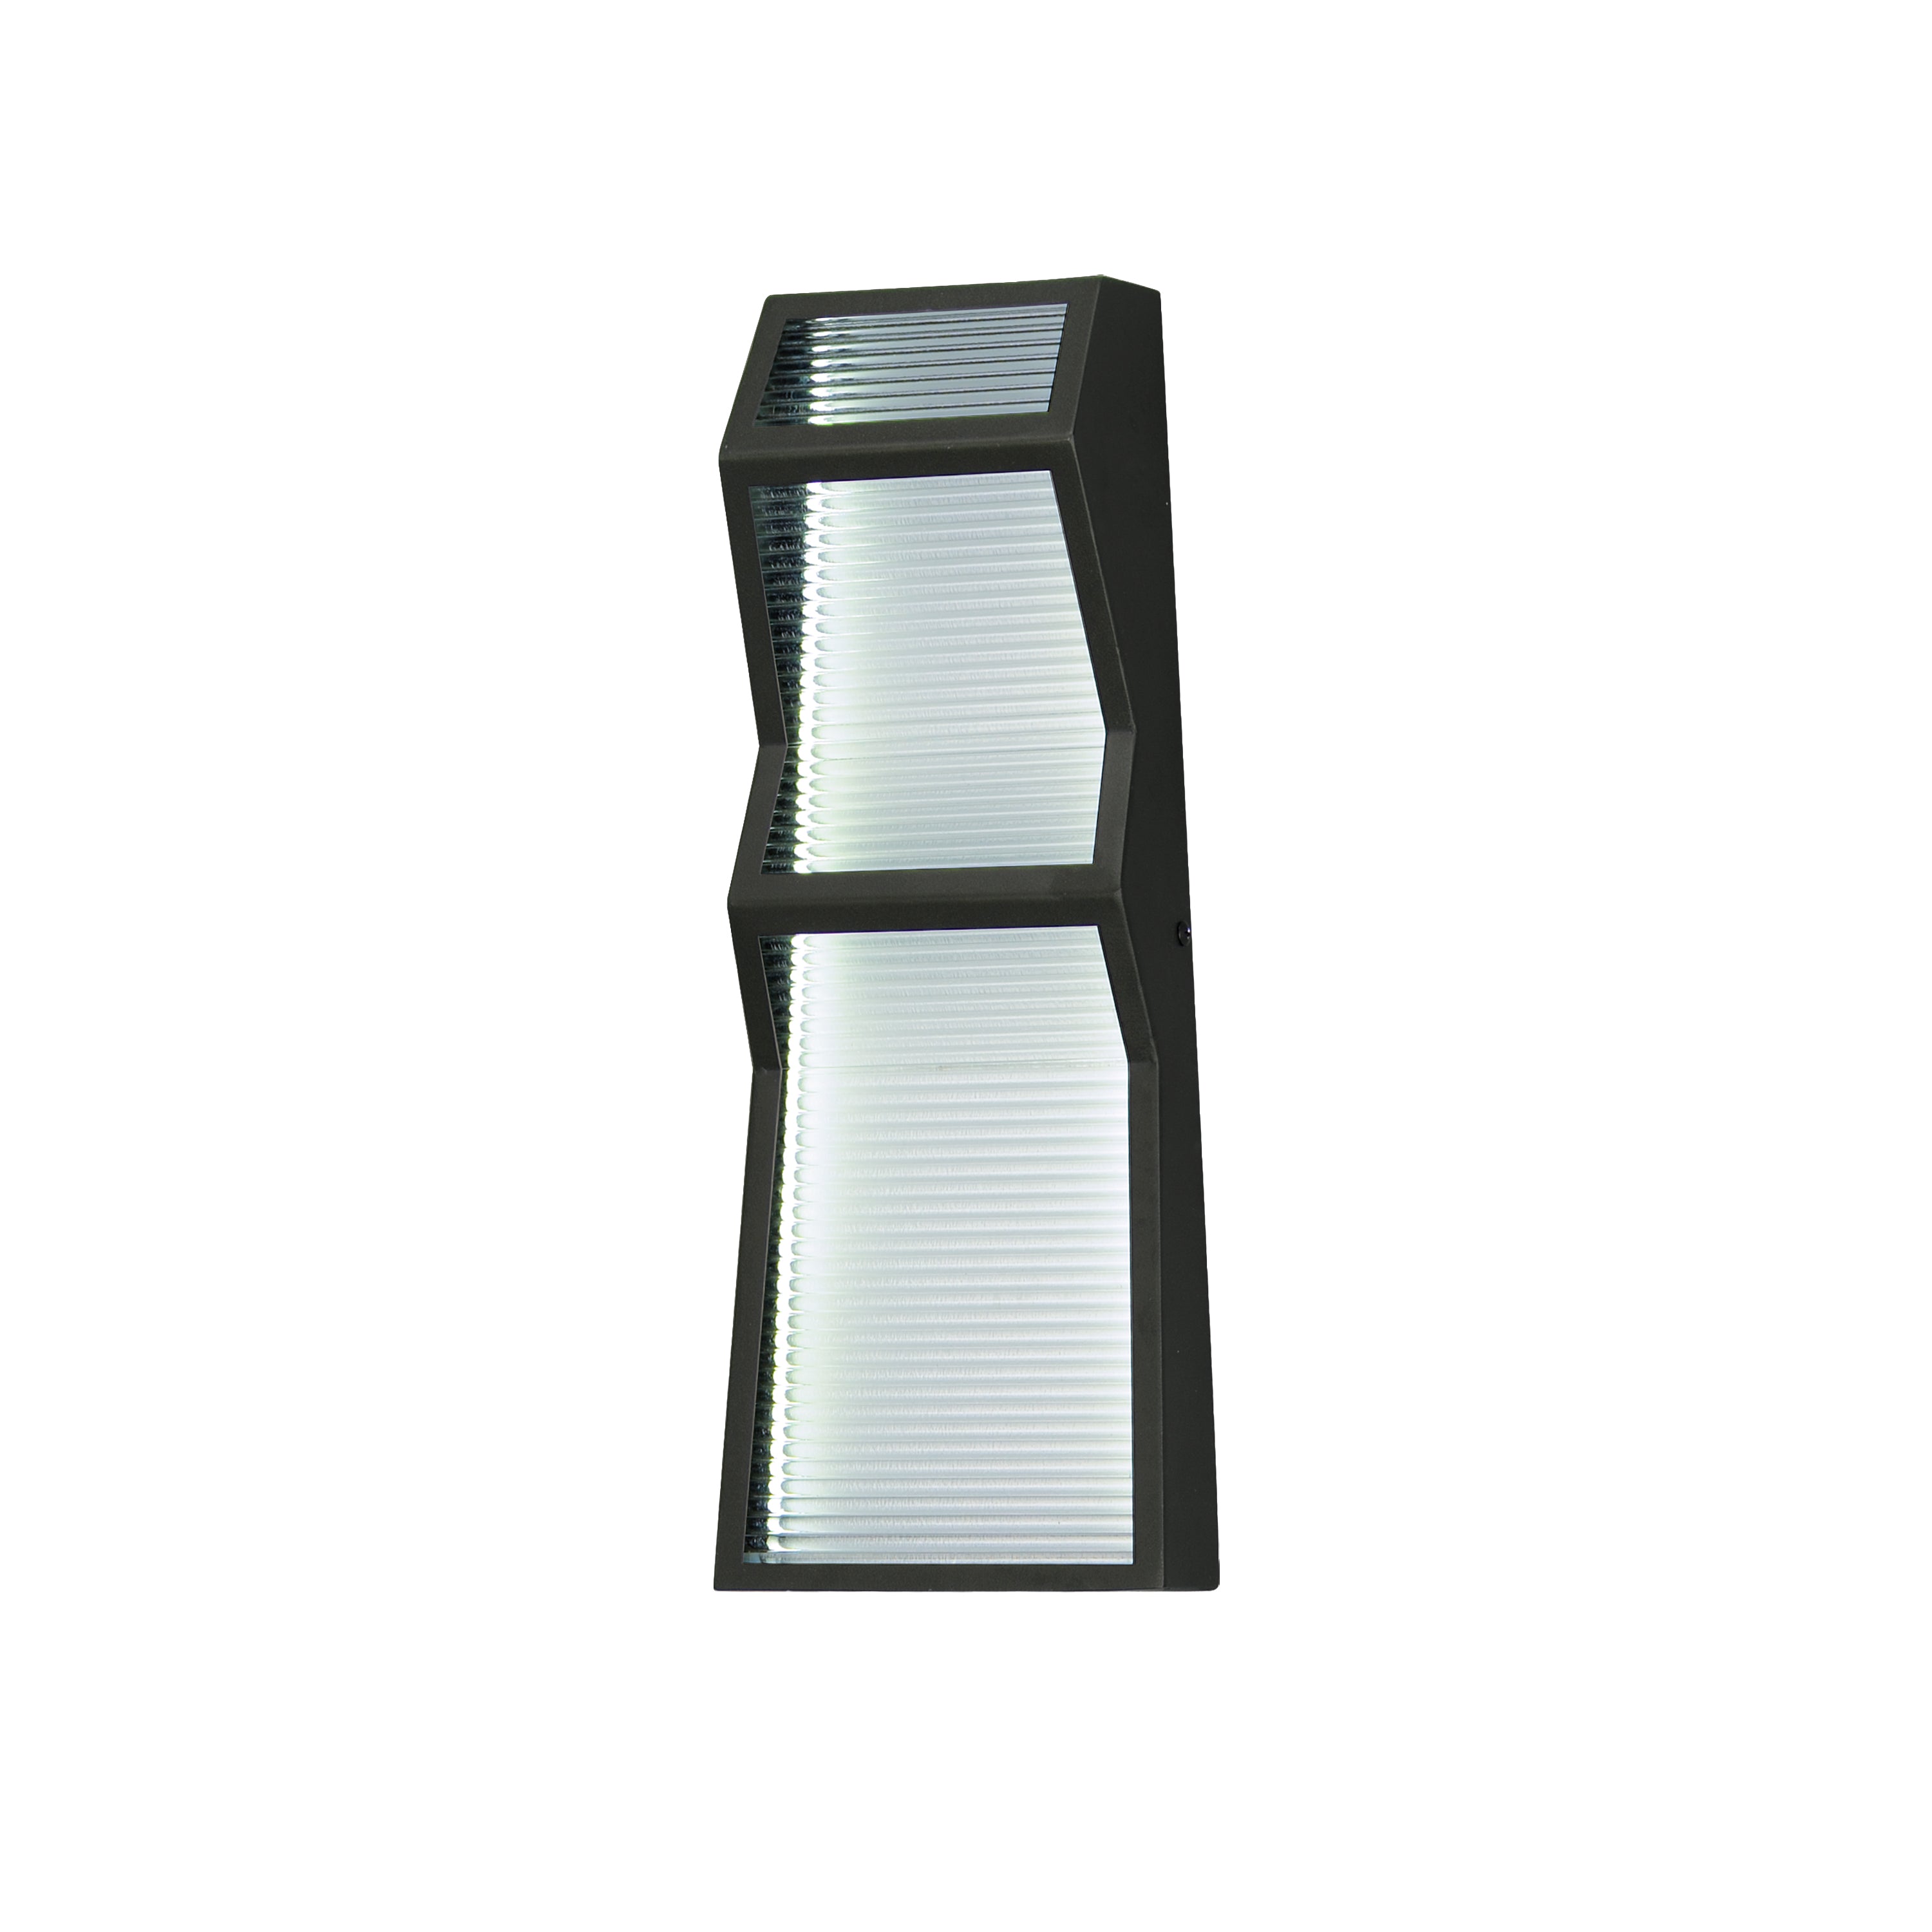 Totem-Outdoor Wall Mount Outdoor l Wall ET2 x6x16 Black 